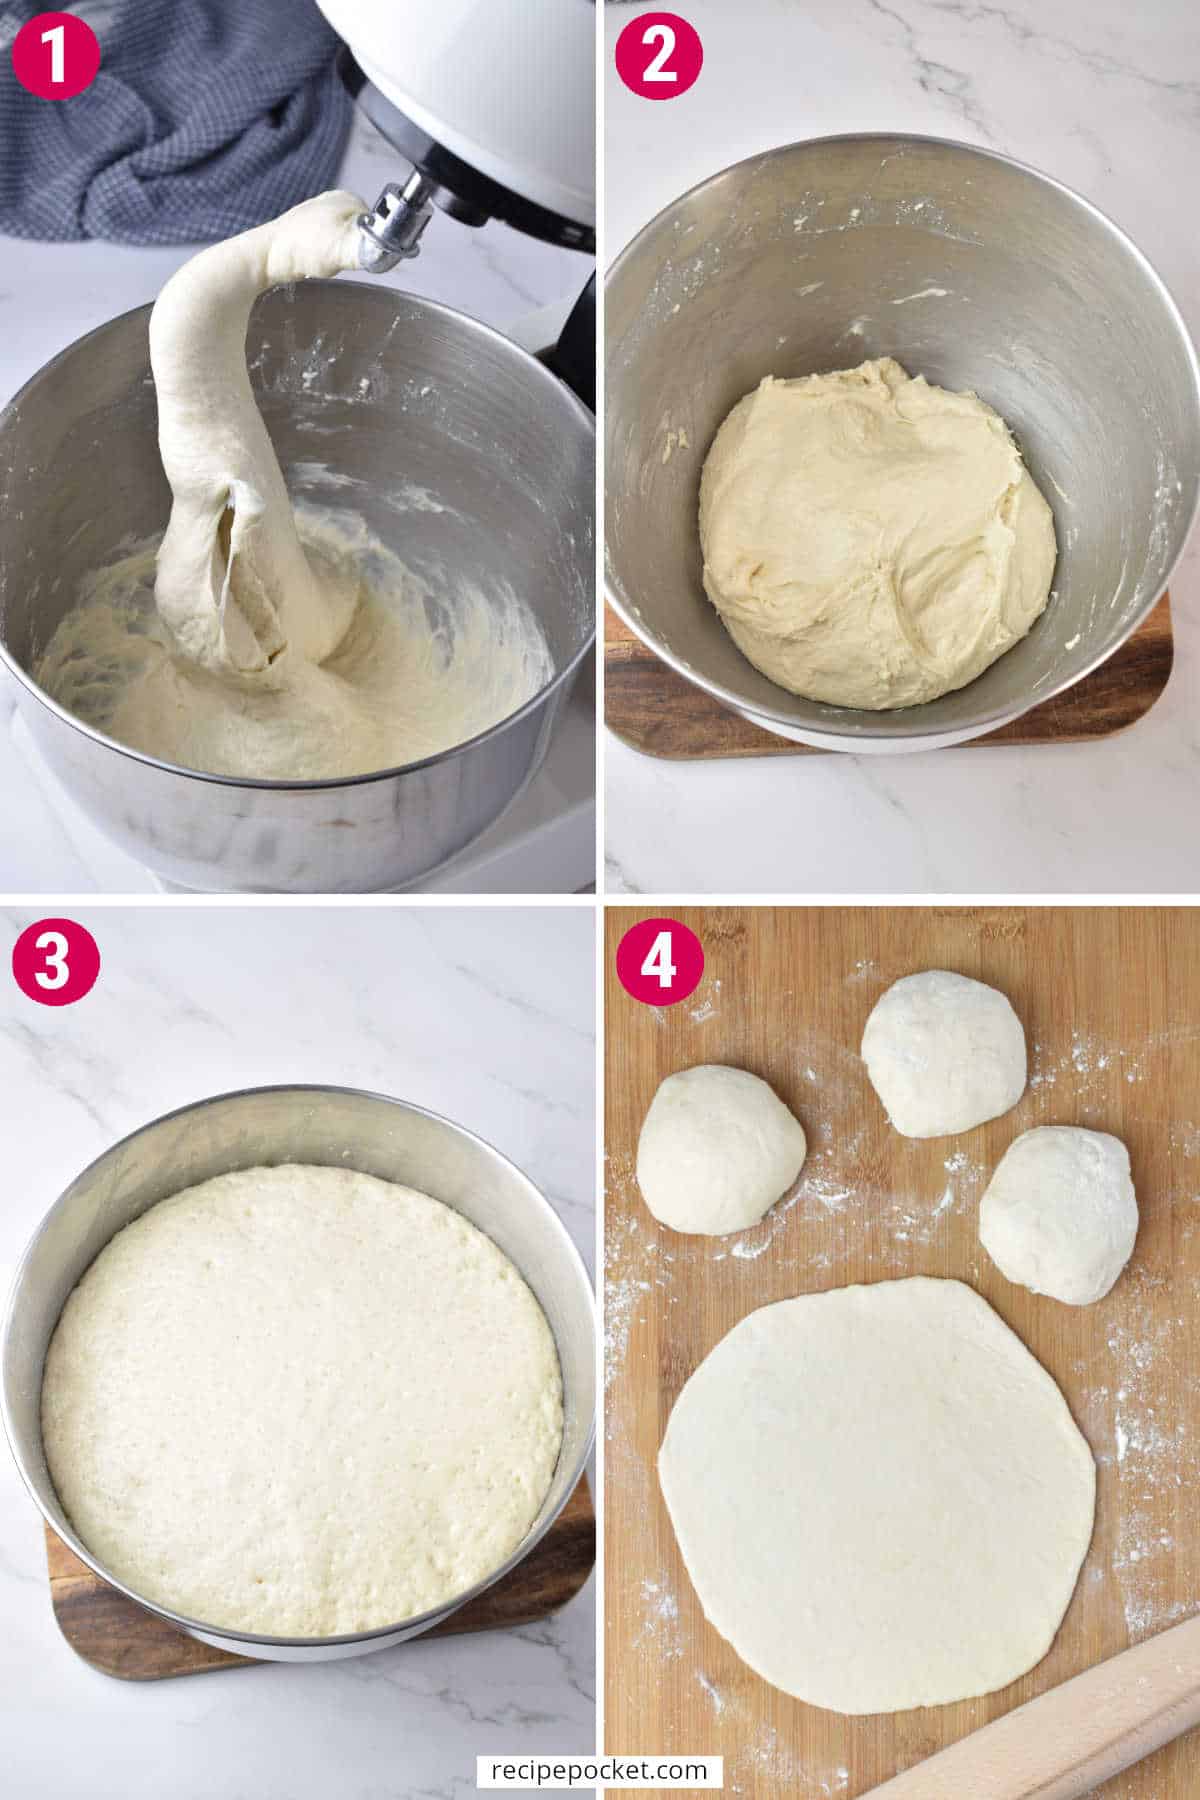 Step by step images showing dough in a stand mixer, dough before and after proofing and rolled out it make flat breads.